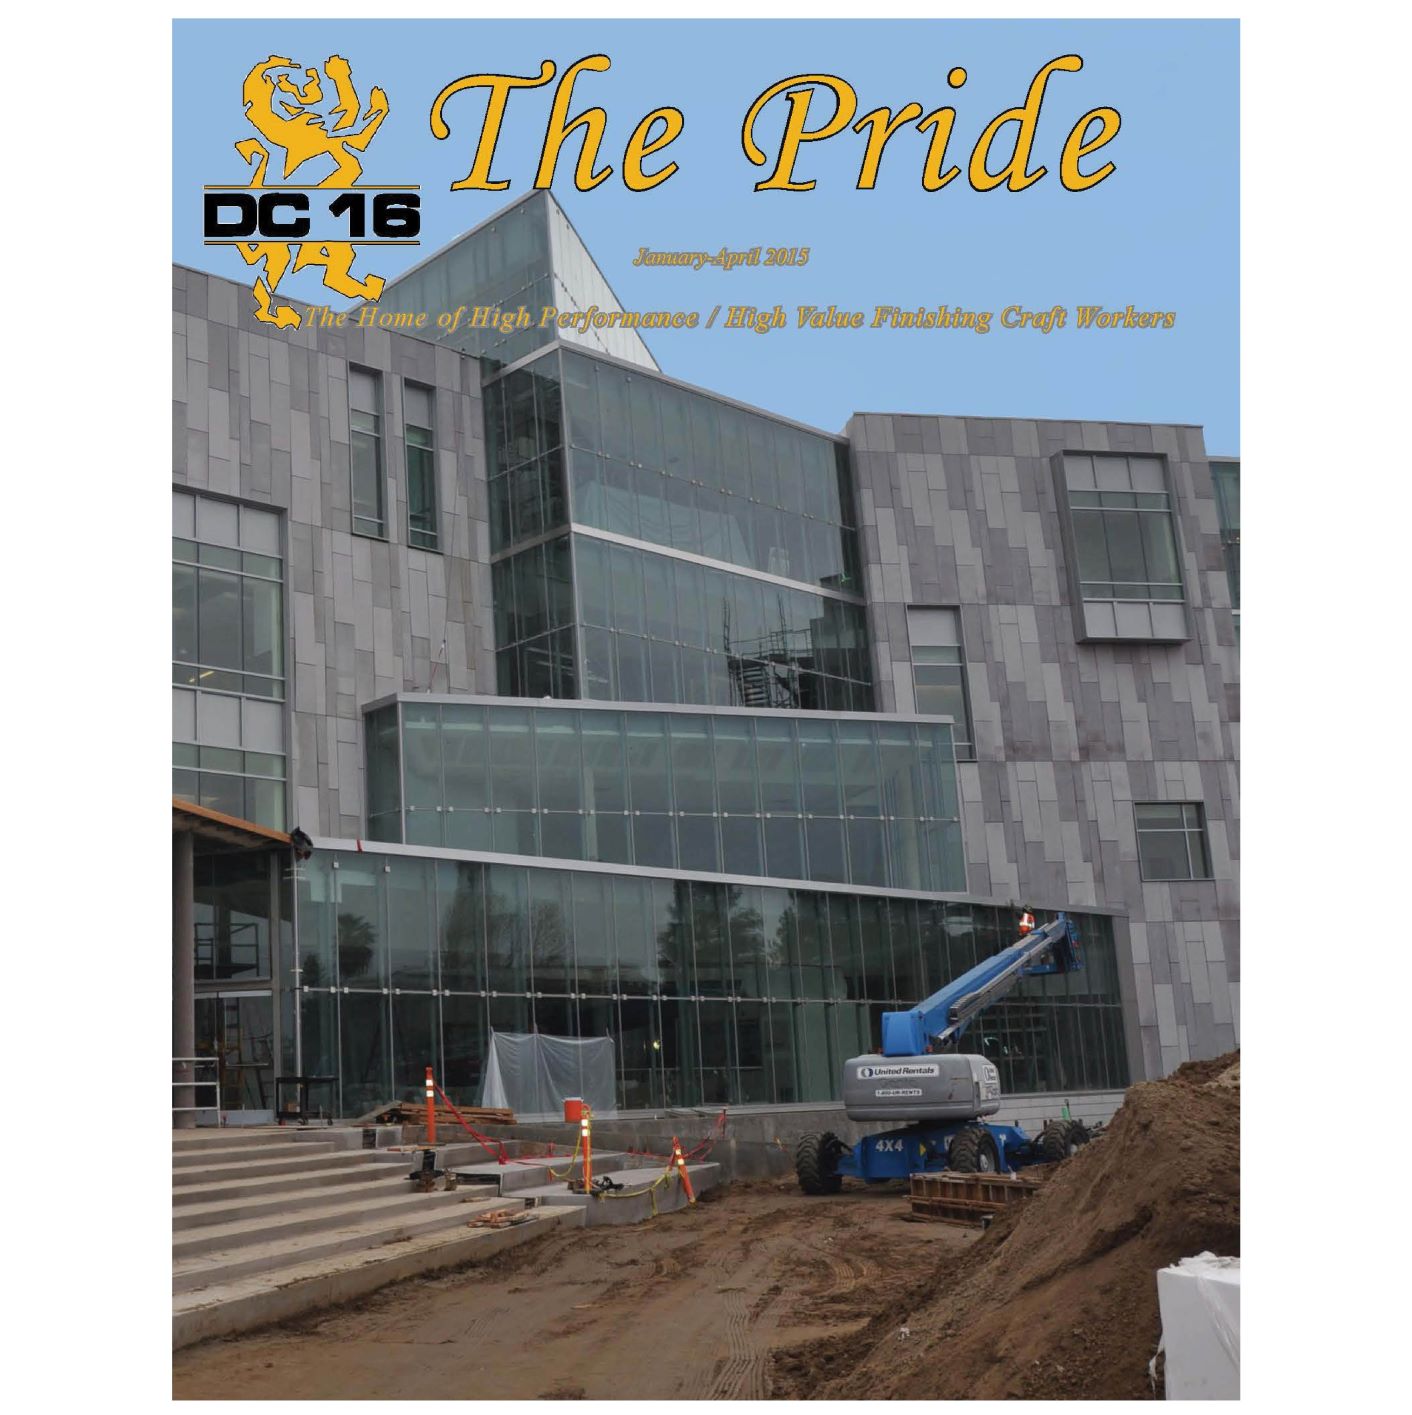 Image from the Gallery: THE PRIDE JANUARY – APRIL 2015